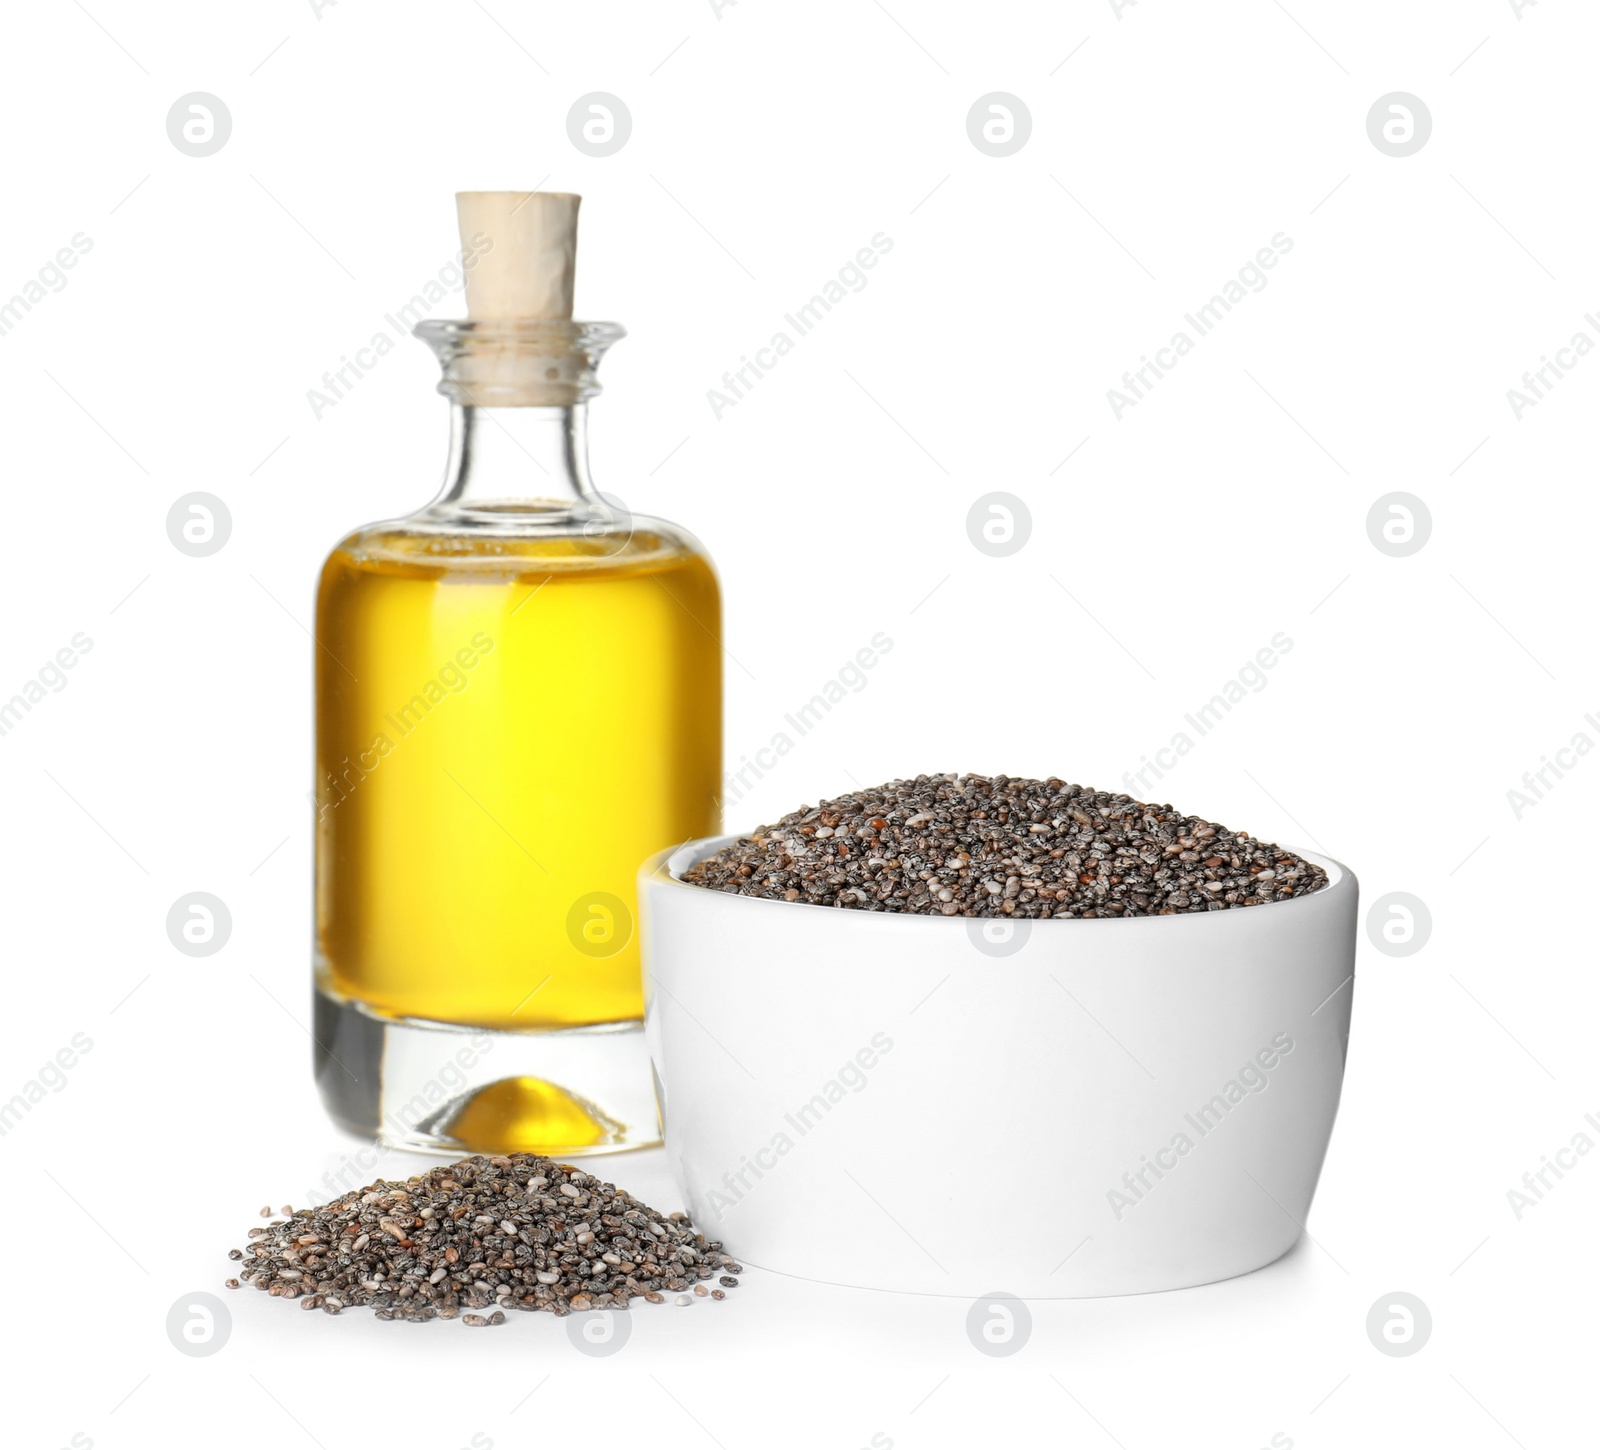 Photo of Bottle of chia oil, bowl and seeds on white background